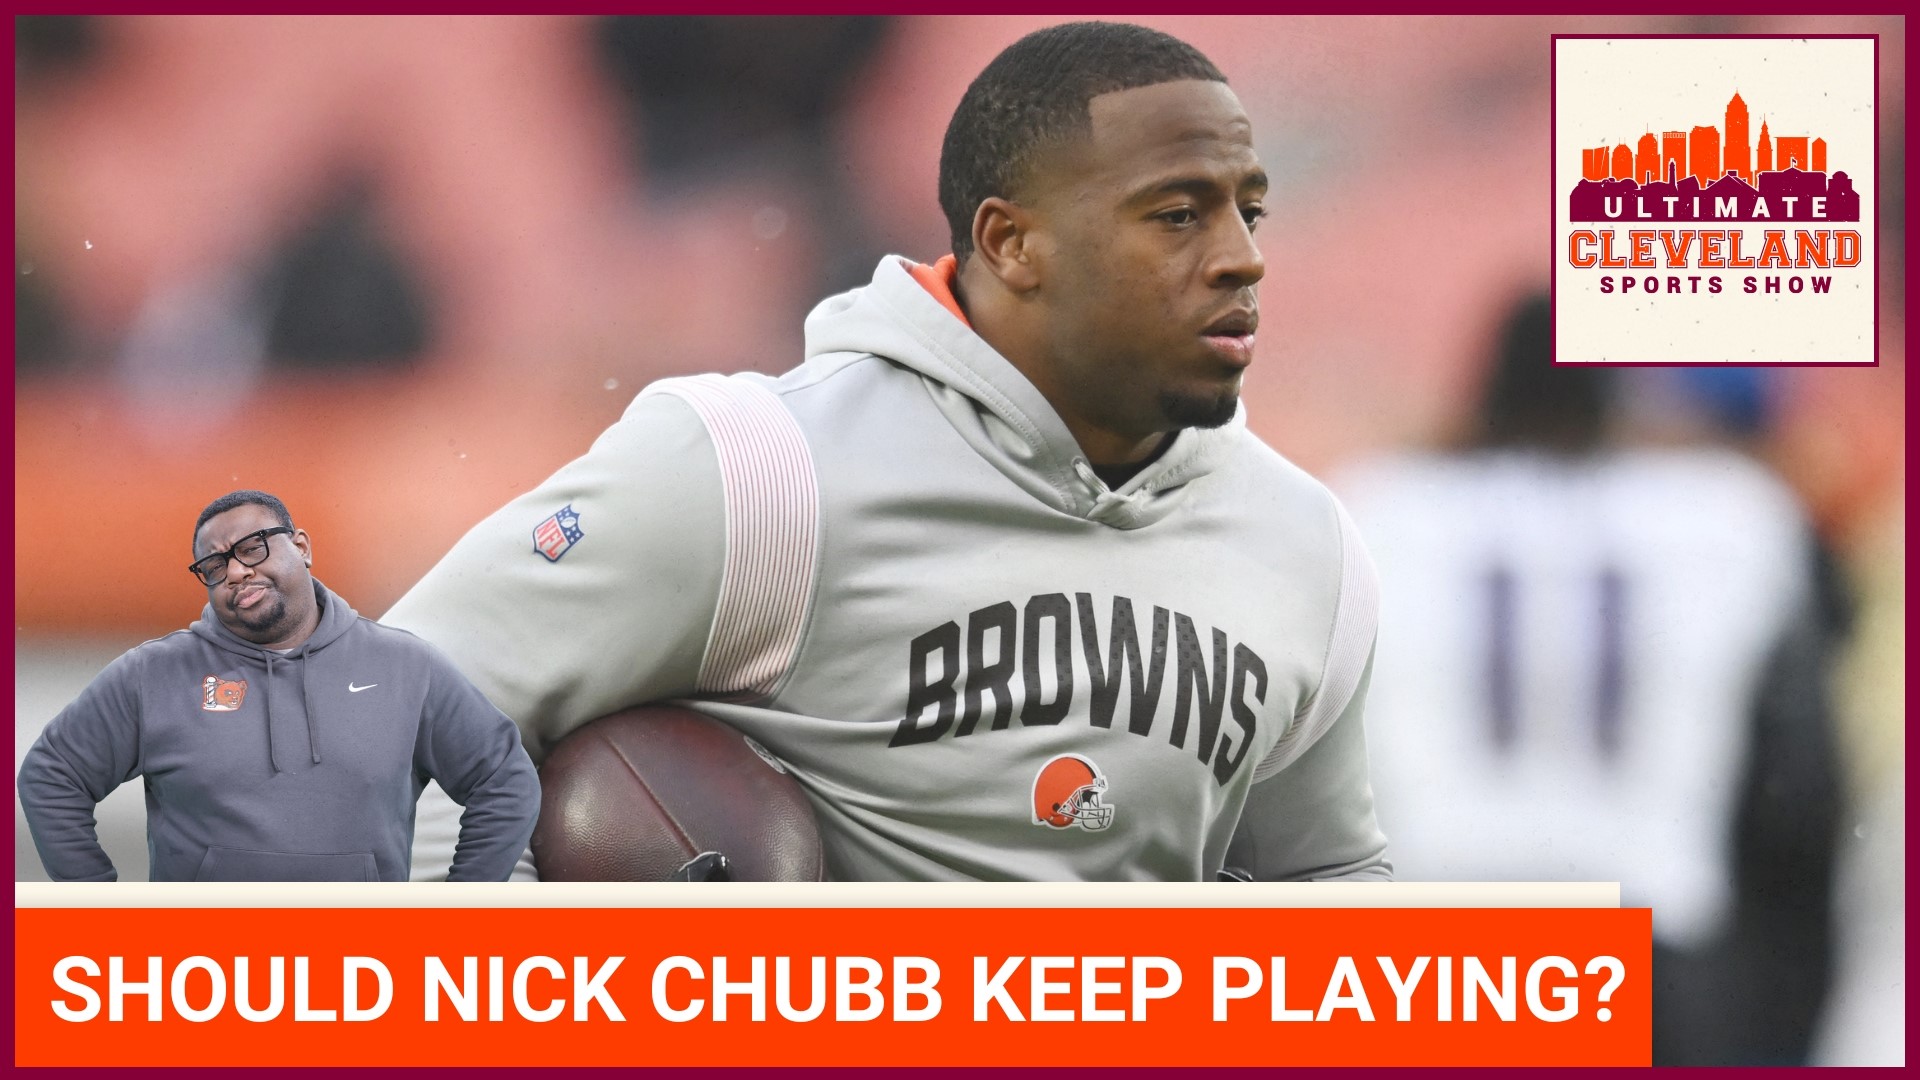 Cleveland Browns star Nick Chubb missed practice with an injury. Should the Browns sit Chubb the rest of the season?